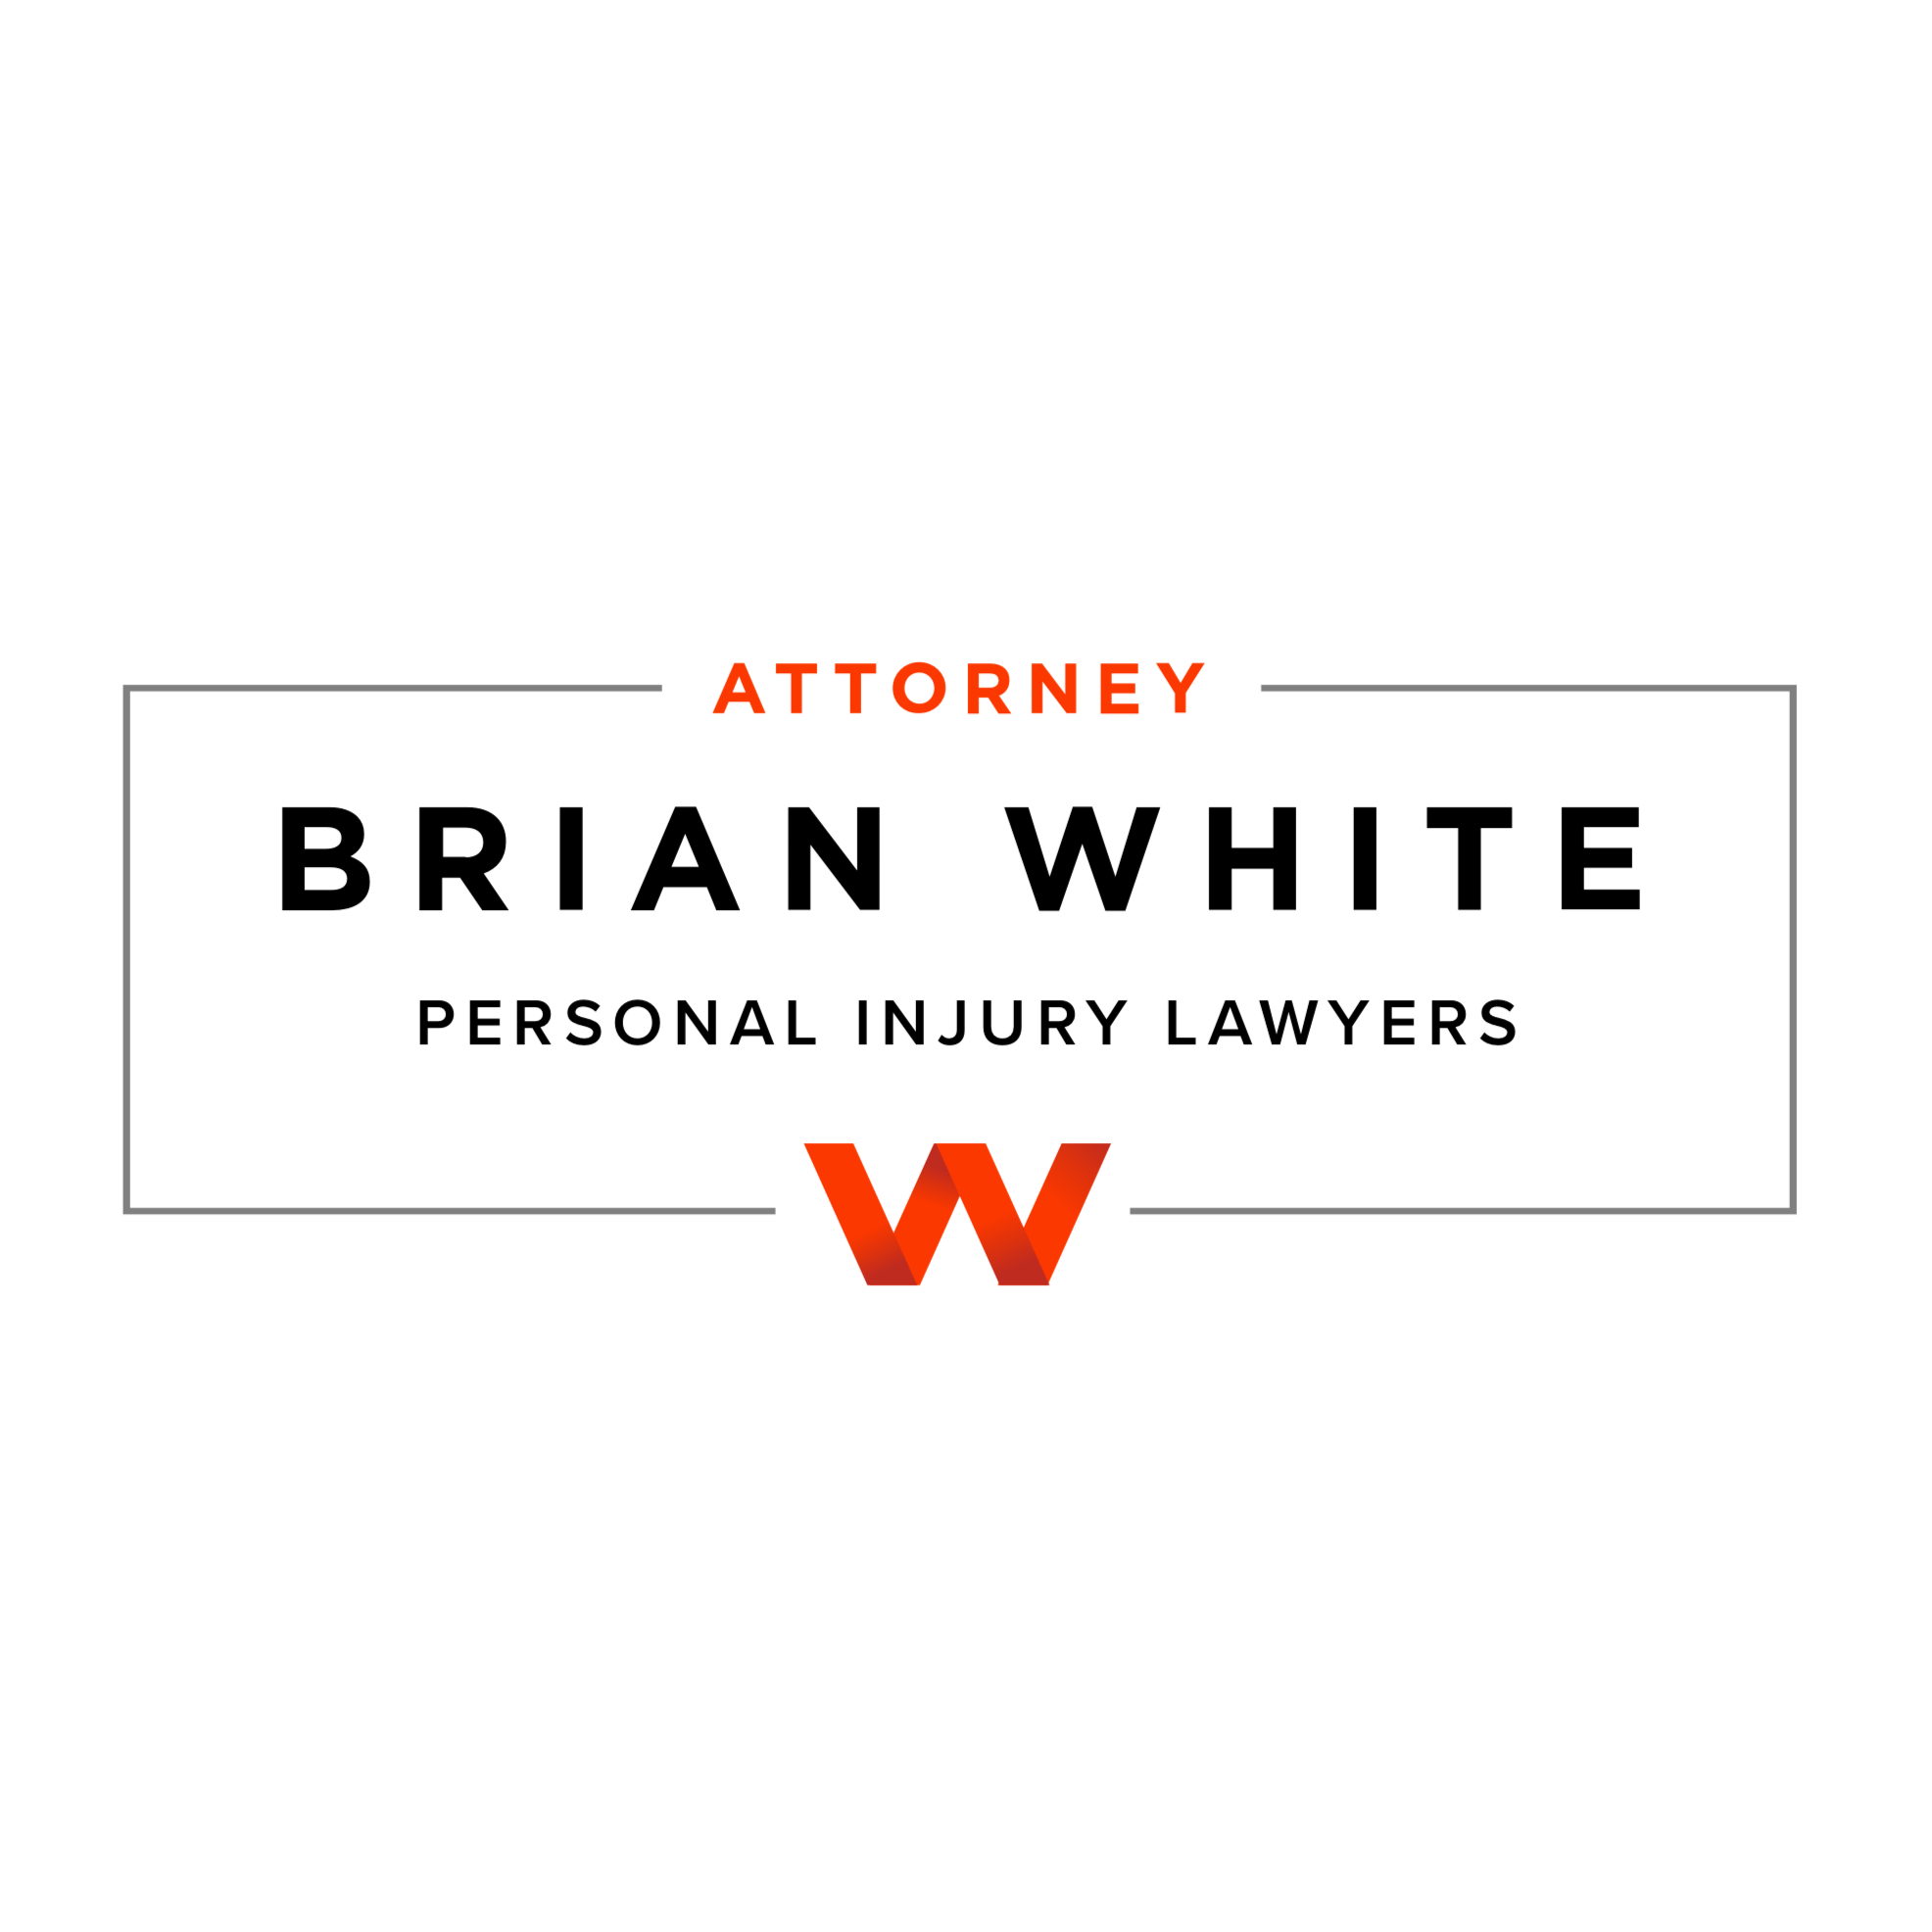 Attorney Brian White Personal Injury Lawyers - East Fwy